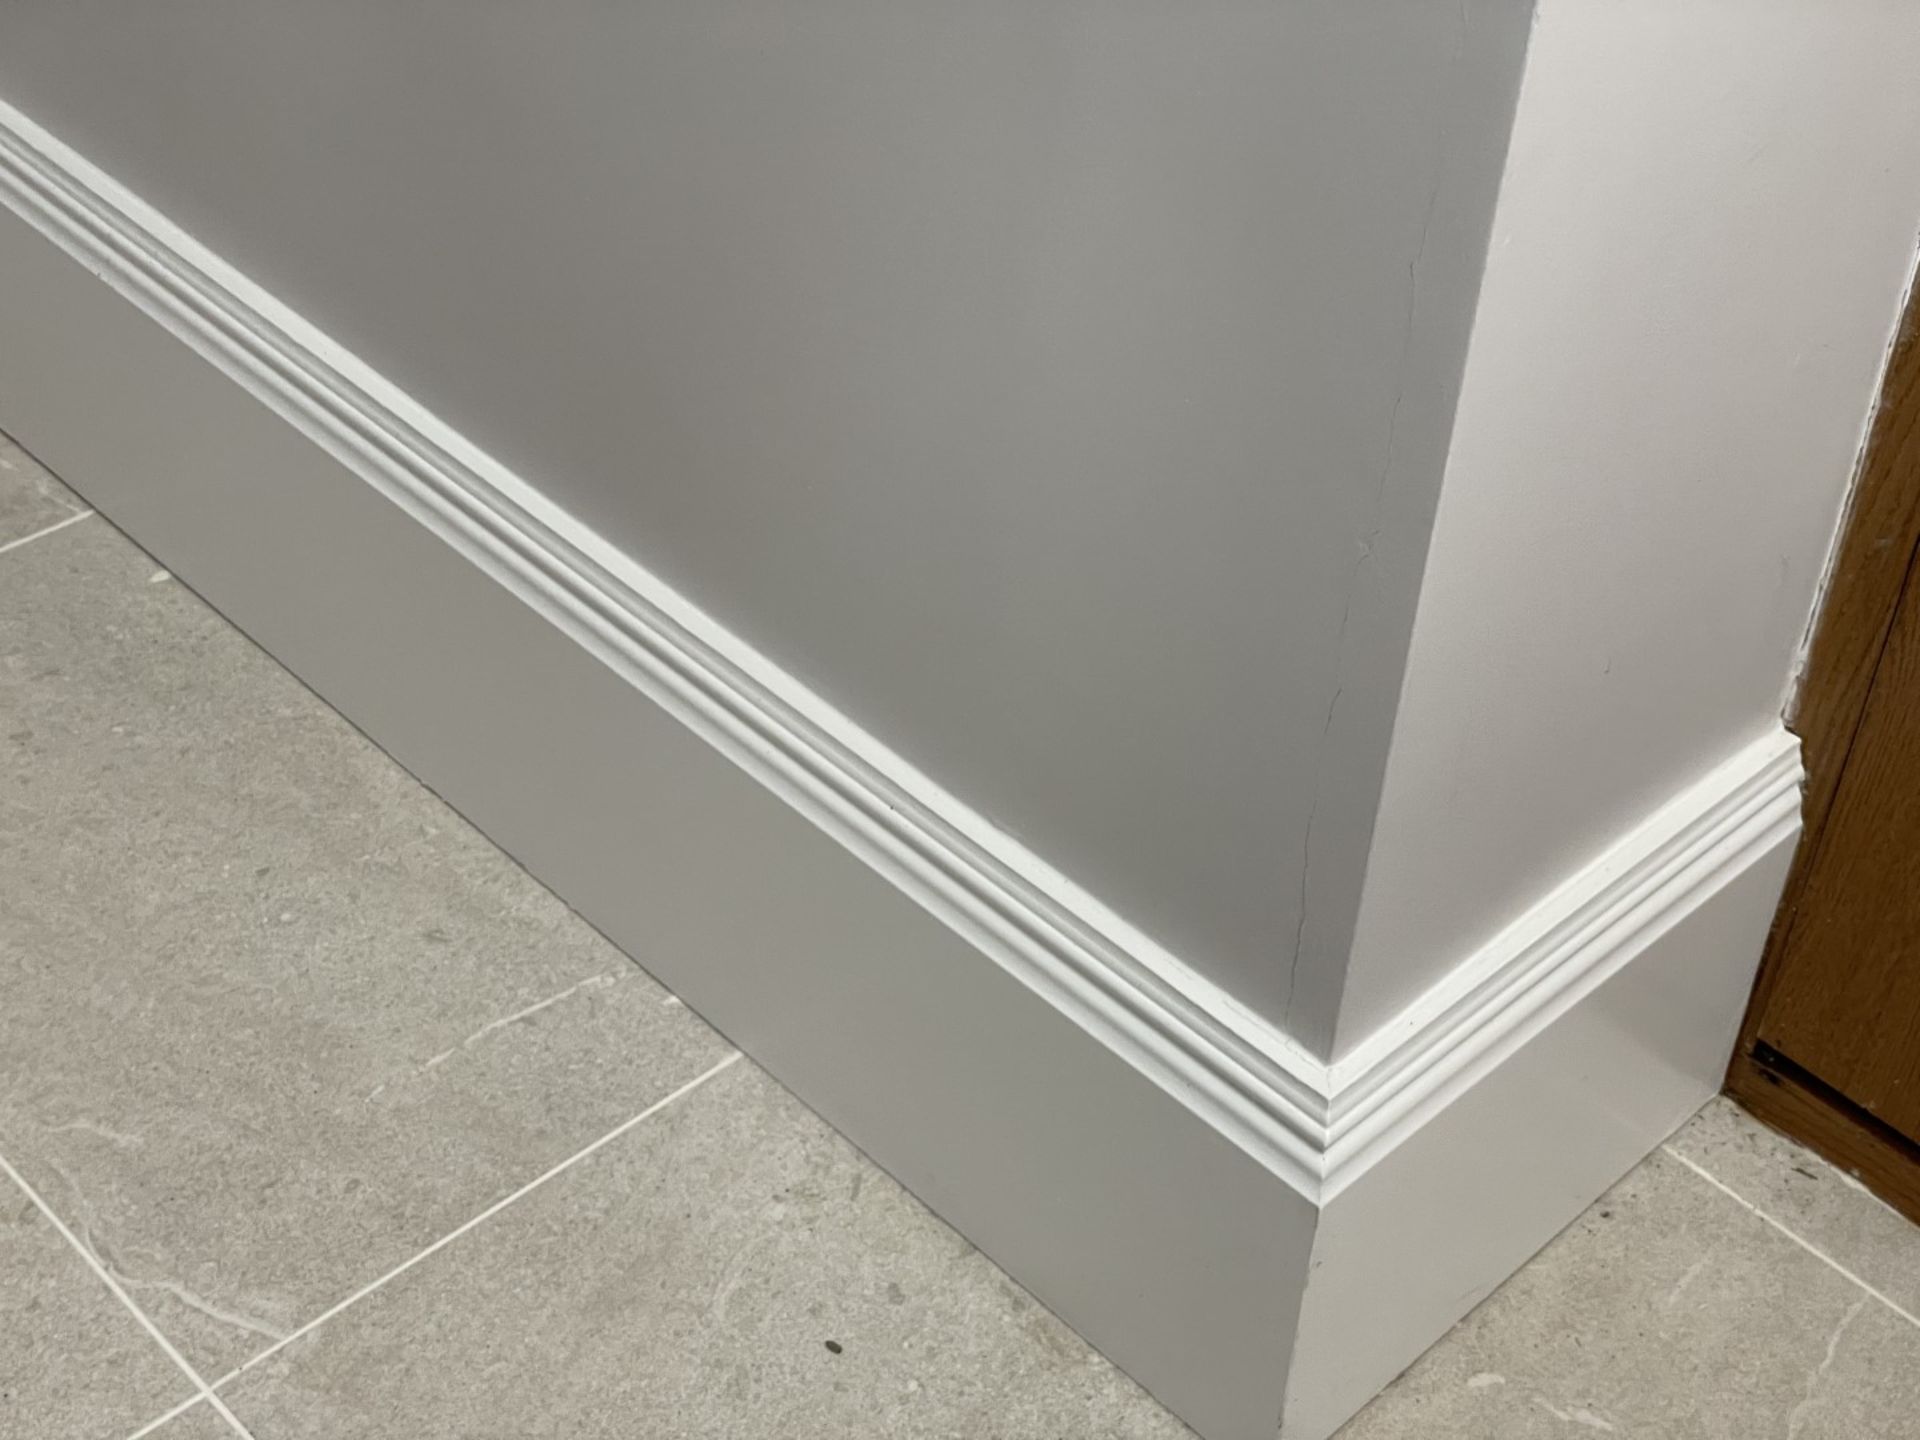 Approximately 10-Metres of Painted Timber Wooden Skirting Boards, In White - Ref: PAN210 - CL896 - - Image 9 of 9